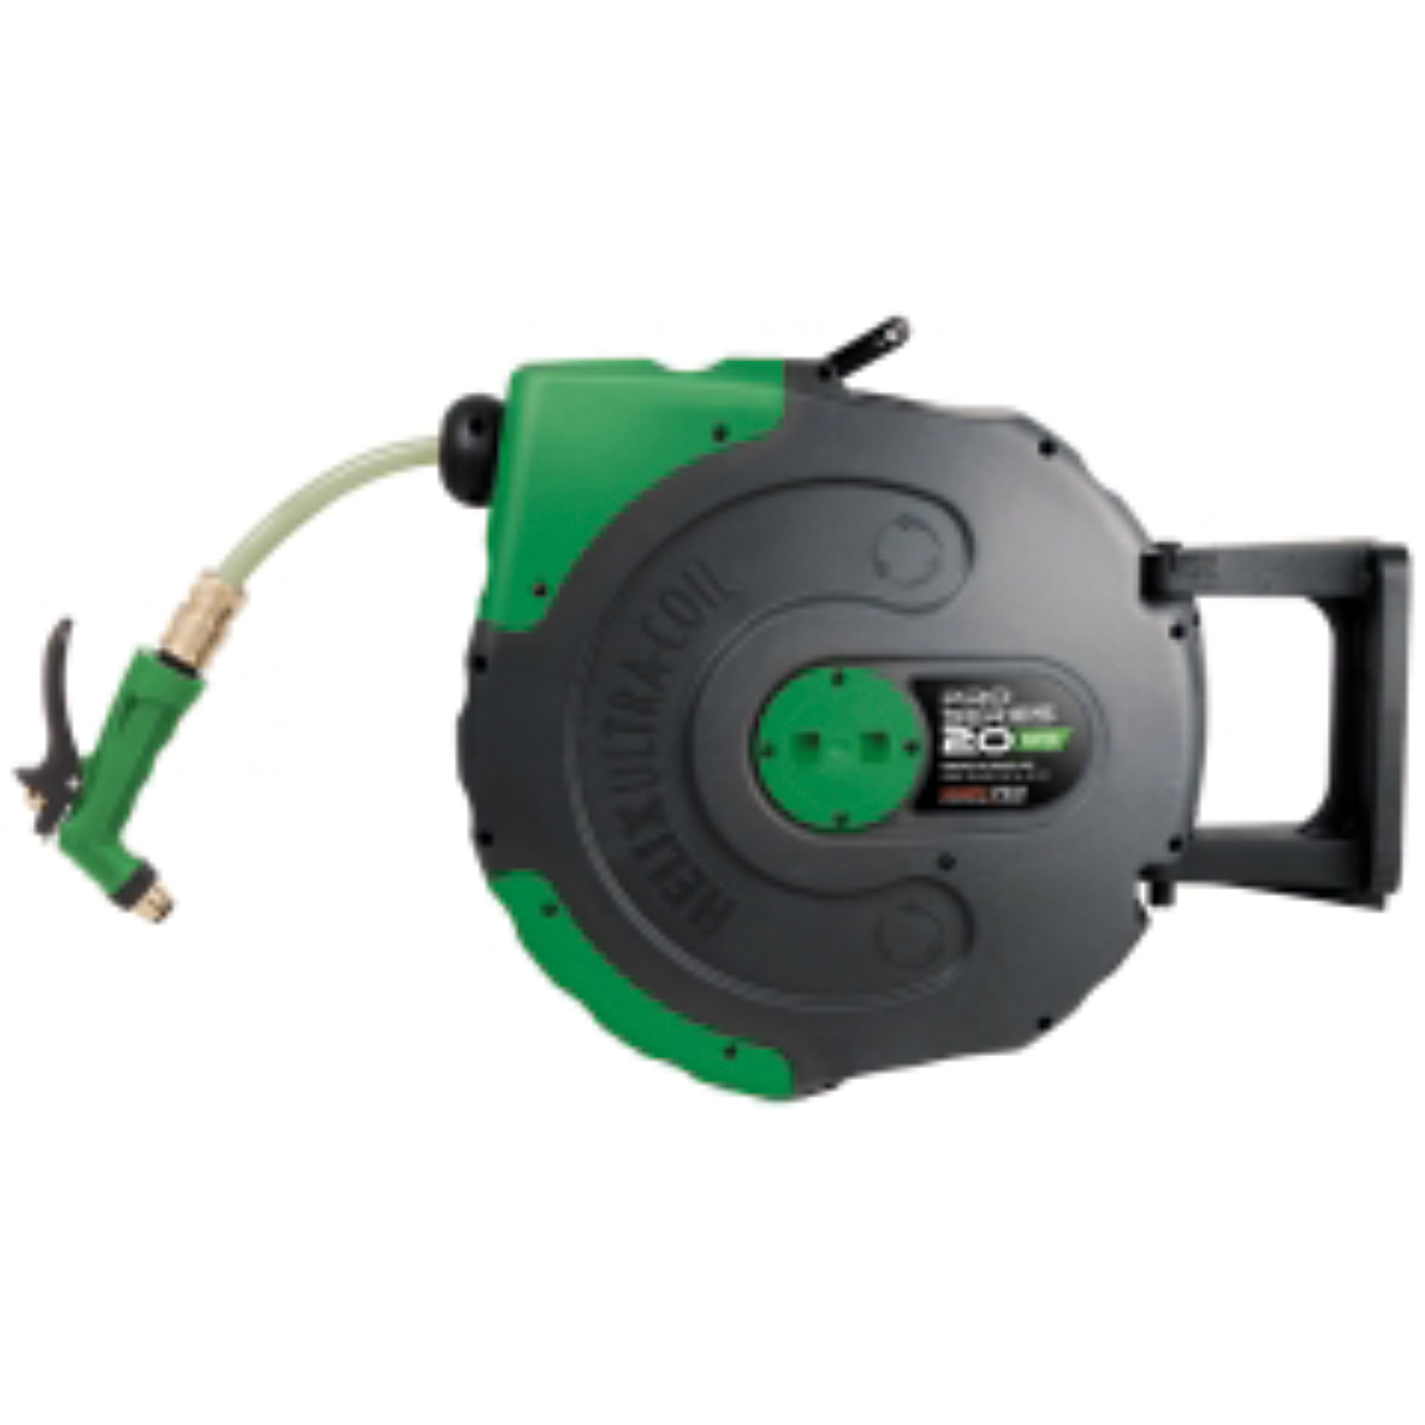 Heavy Duty Water Hose Reel complete with Hose